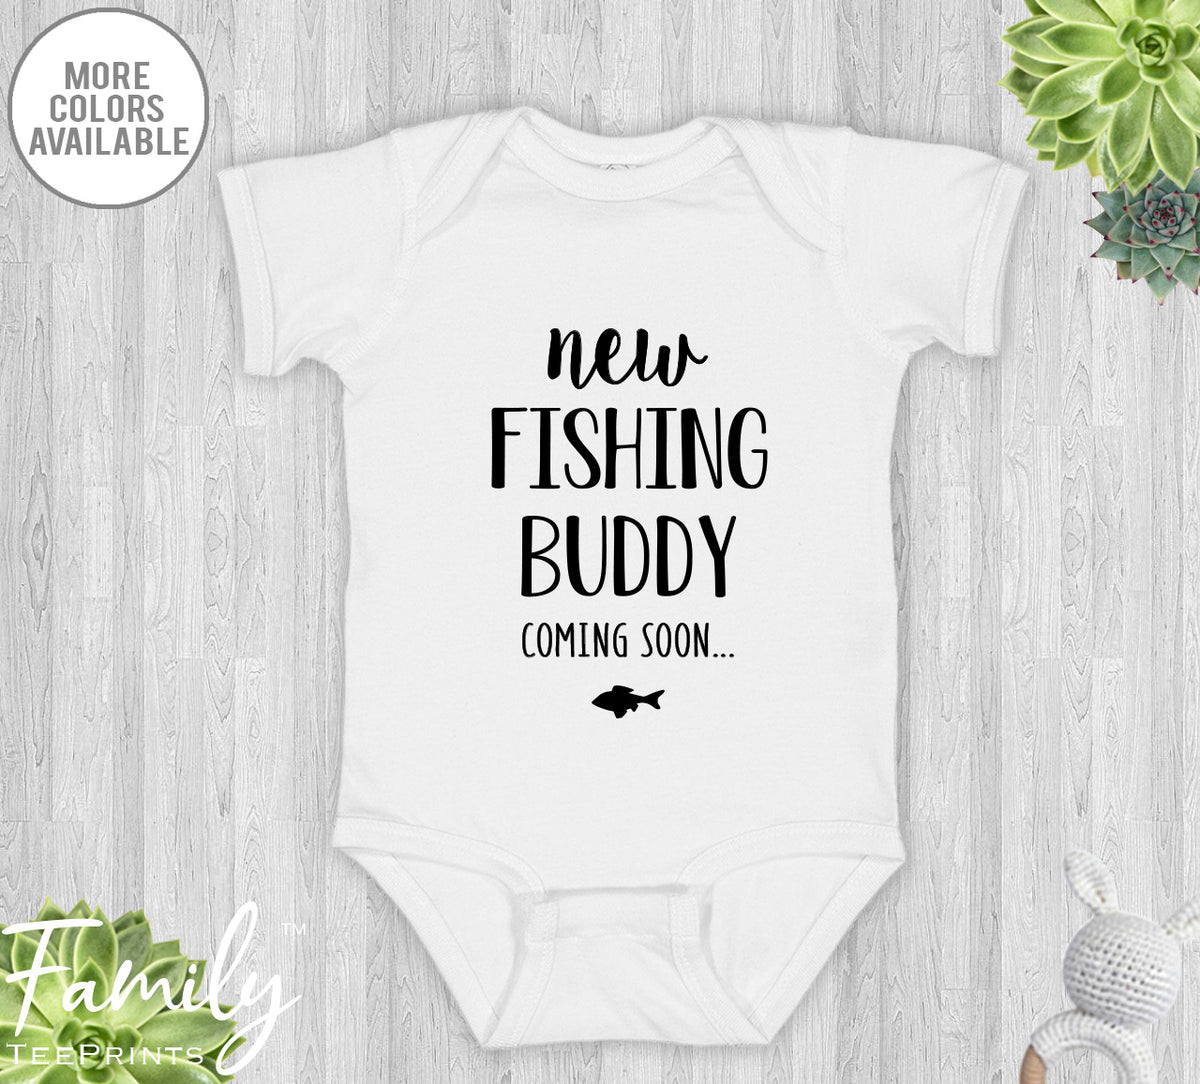 New Fishing Buddy Coming Soon - Baby Onesie - Pregnancy Reveal Gift - Baby Announcement - familyteeprints